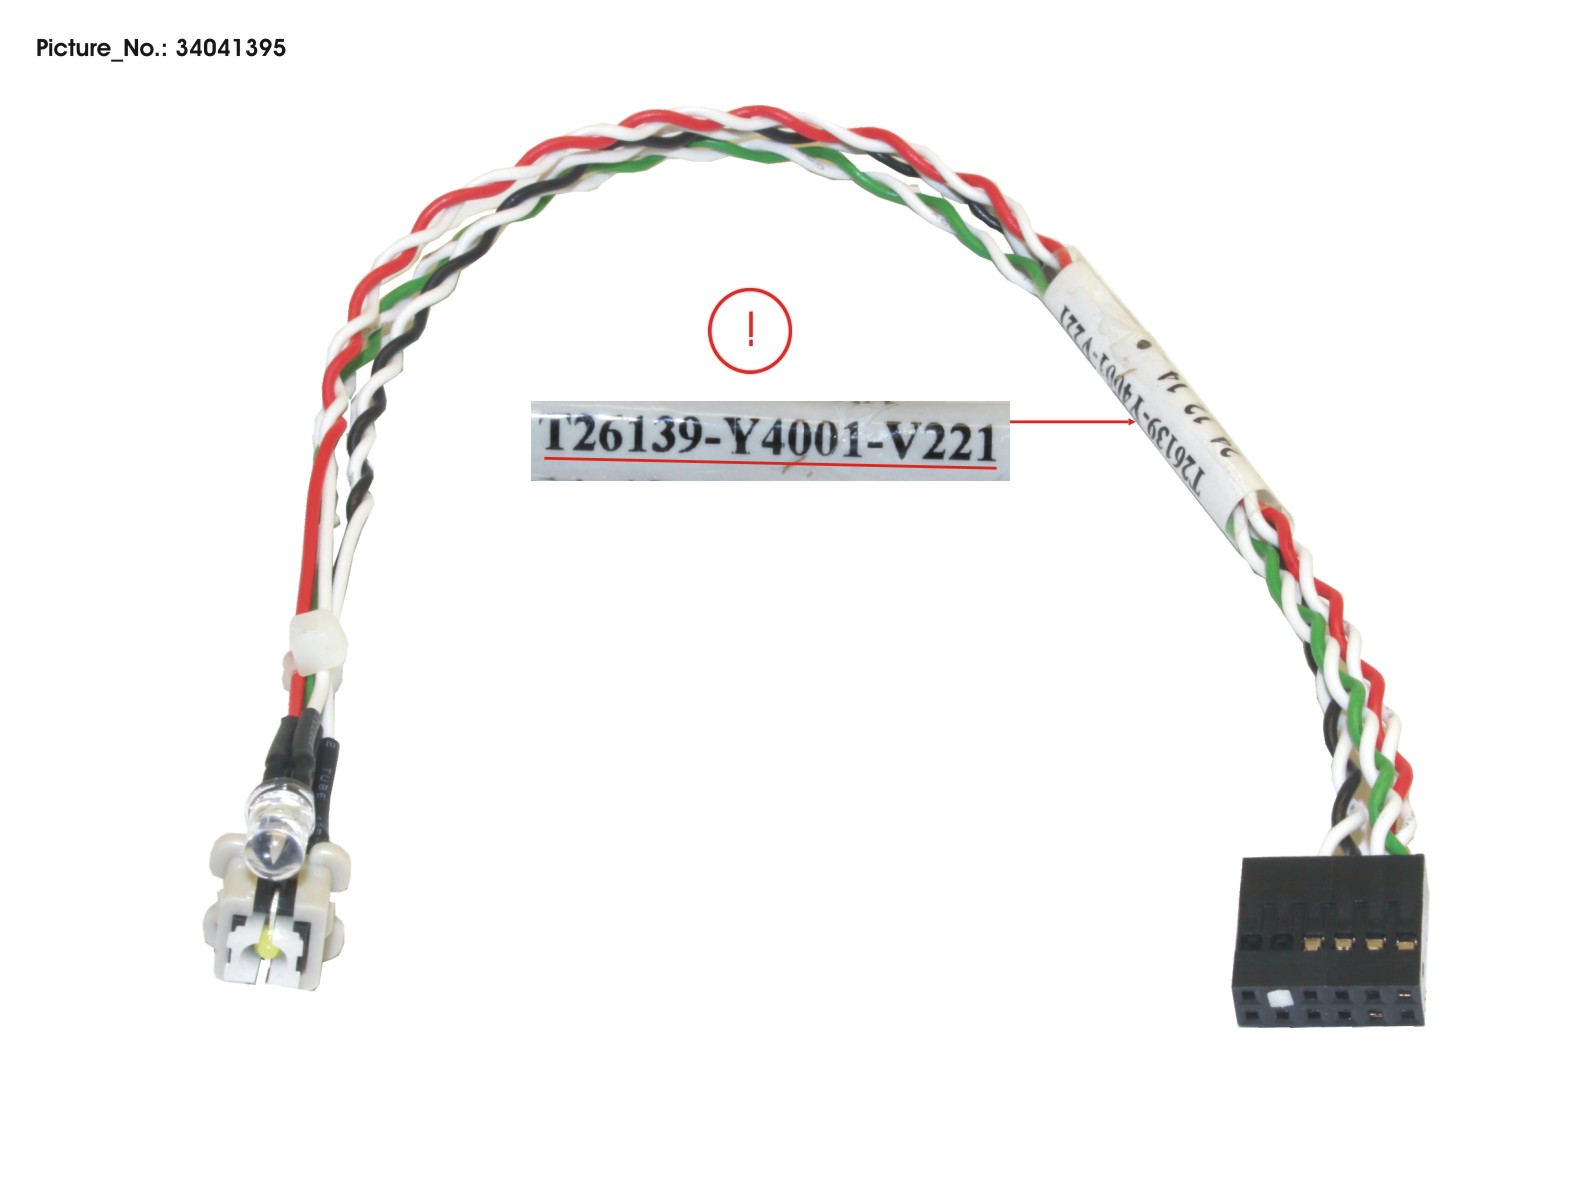 FUJITSU CABLE ON/OFF SWITCH